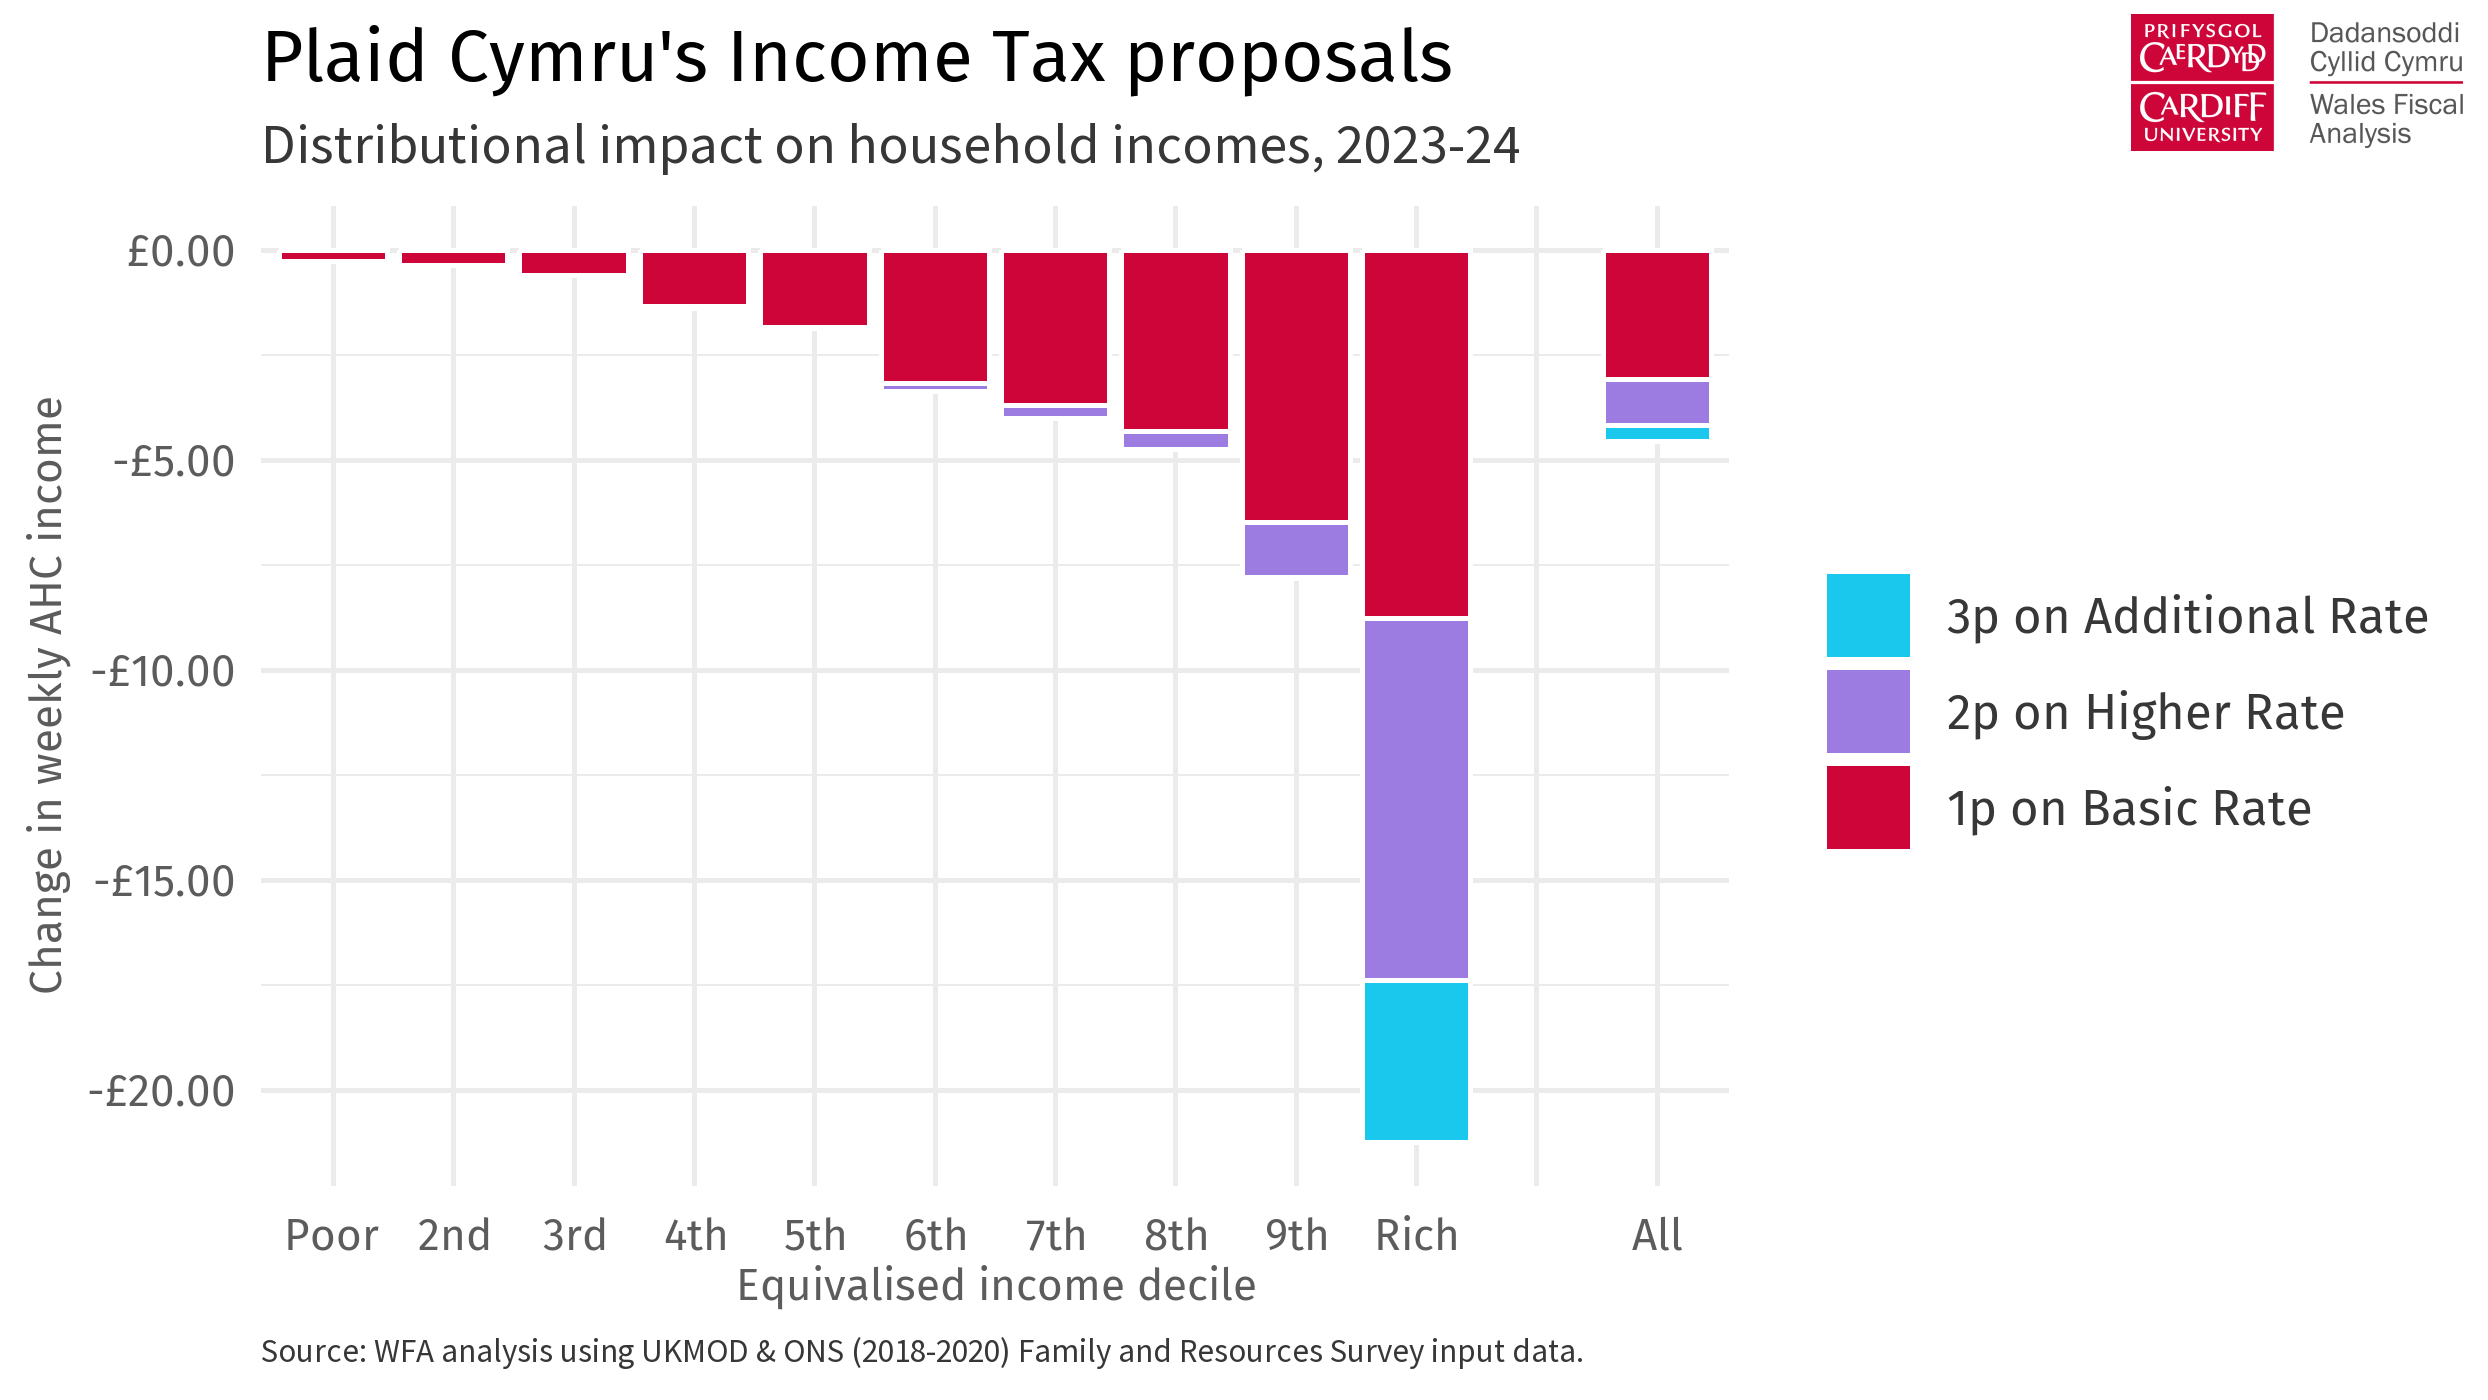 The image has the title Plaid Cymru's Income Tax proposals and subtitle Distributional impact of household incomes, 2023-24. A 11 vertical bars show how many pounds per week each income decile and rate of tax would pay in additional tax. The y axis goes from 0 to -20 pounds, with the 10th decile, classed as rich, paying above 20 pounds. The source is WFA analysis using UKMOD & ONS (2018-2020) Family Resources Survey input data. To the right and above is the Cardiff University and Wales Fiscal Analysis logo.